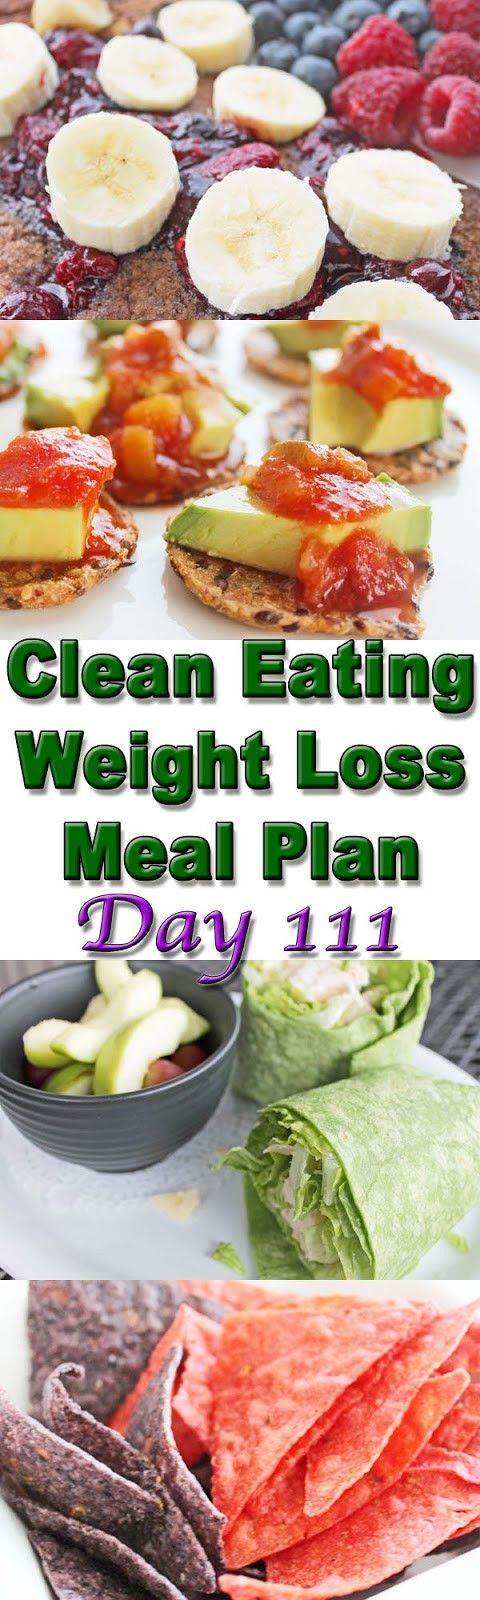 Clean Eating Weight Loss Meal Plan
 Clean Eating Weight Loss Meal Plan 111